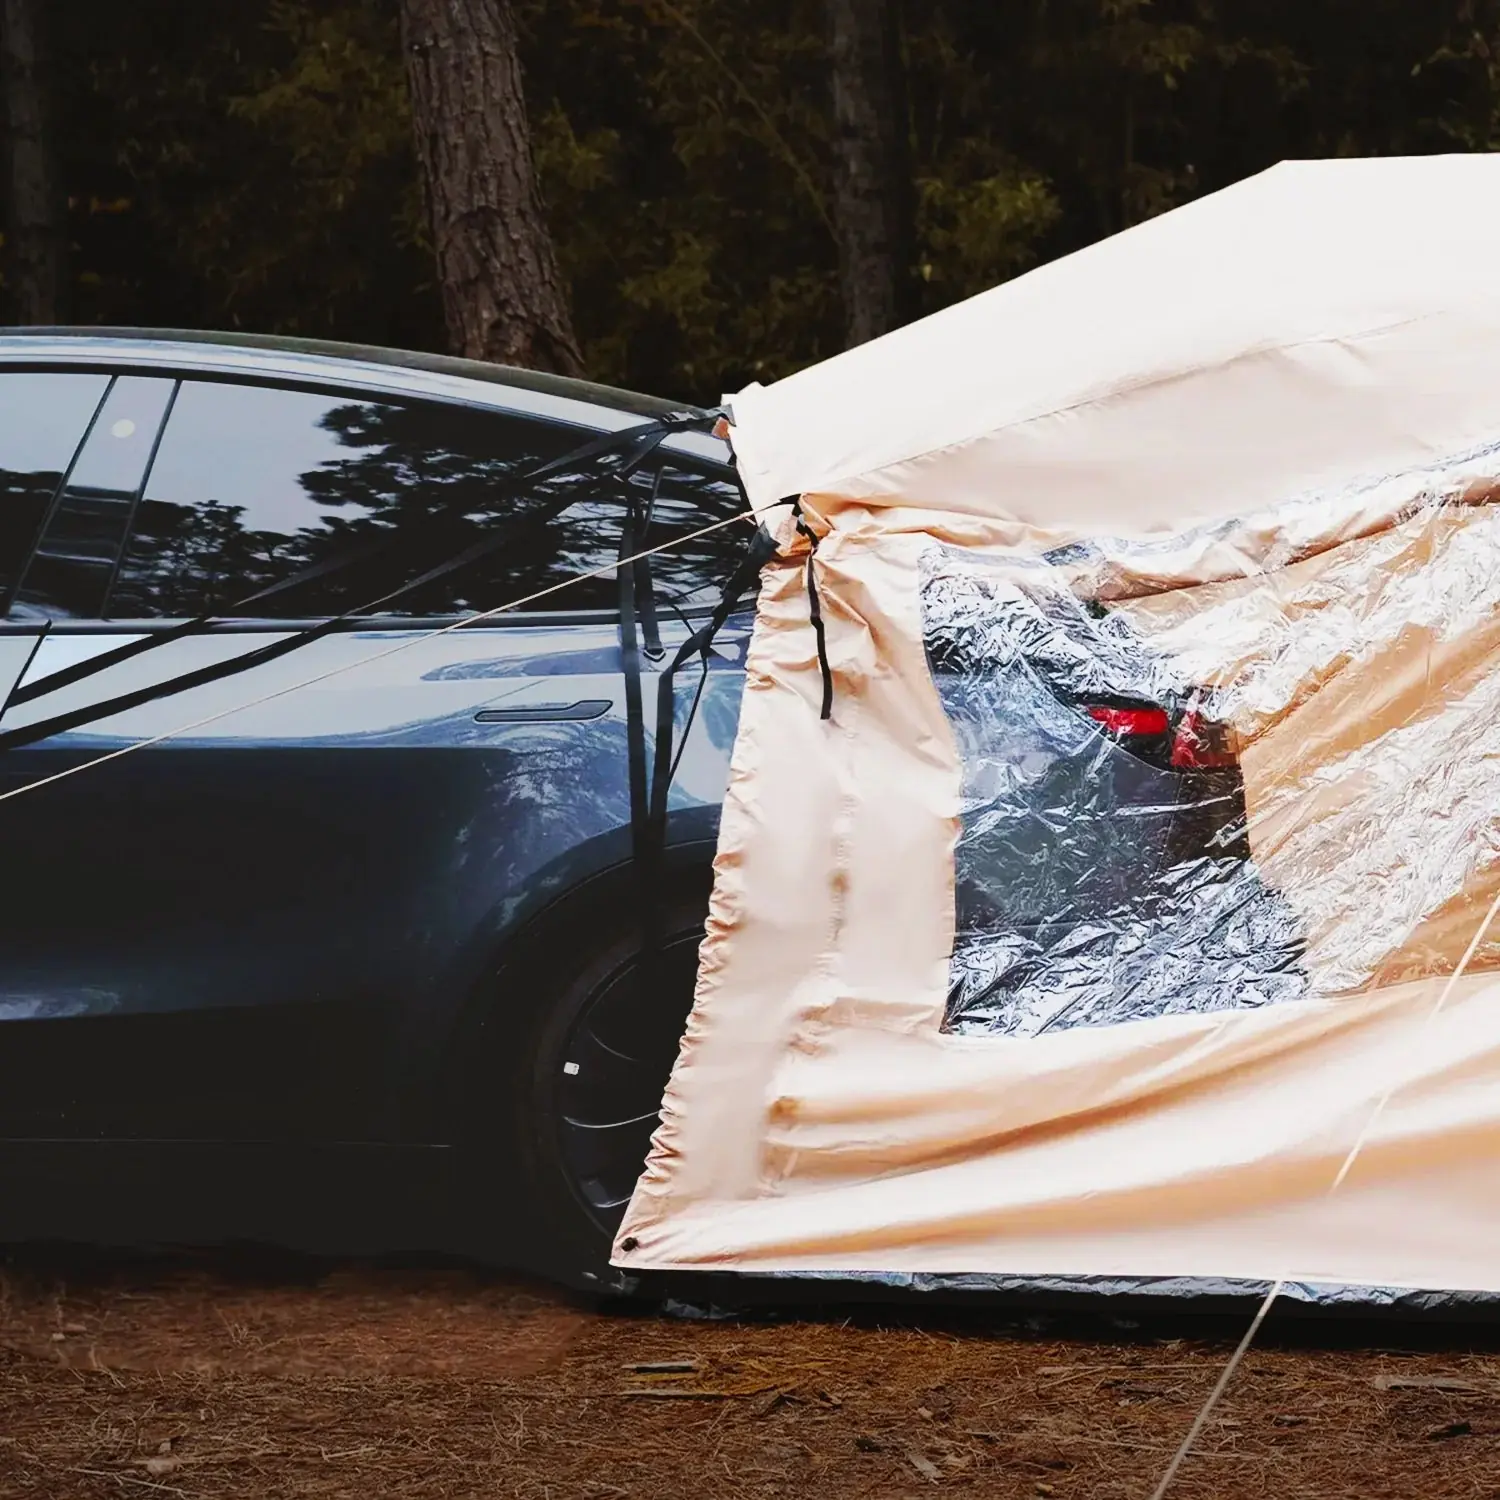 Explore the Great Outdoors with Adreama's Tesla Model Y Camping Tent